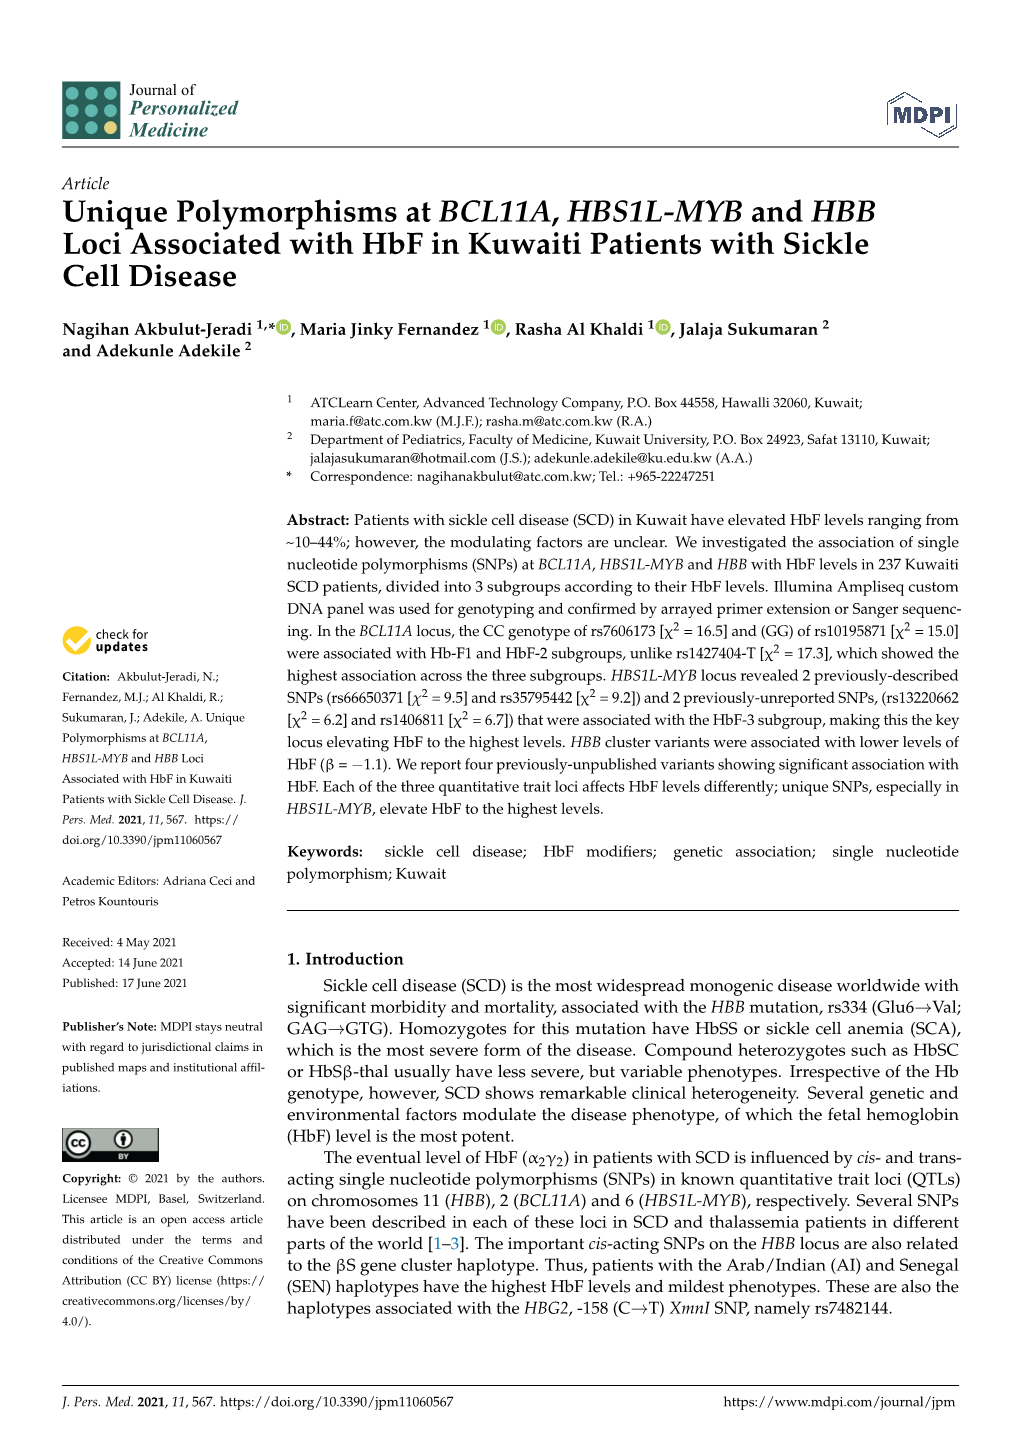 Unique Polymorphisms at BCL11A, HBS1L-MYB and HBB Loci Associated with Hbf in Kuwaiti Patients with Sickle Cell Disease